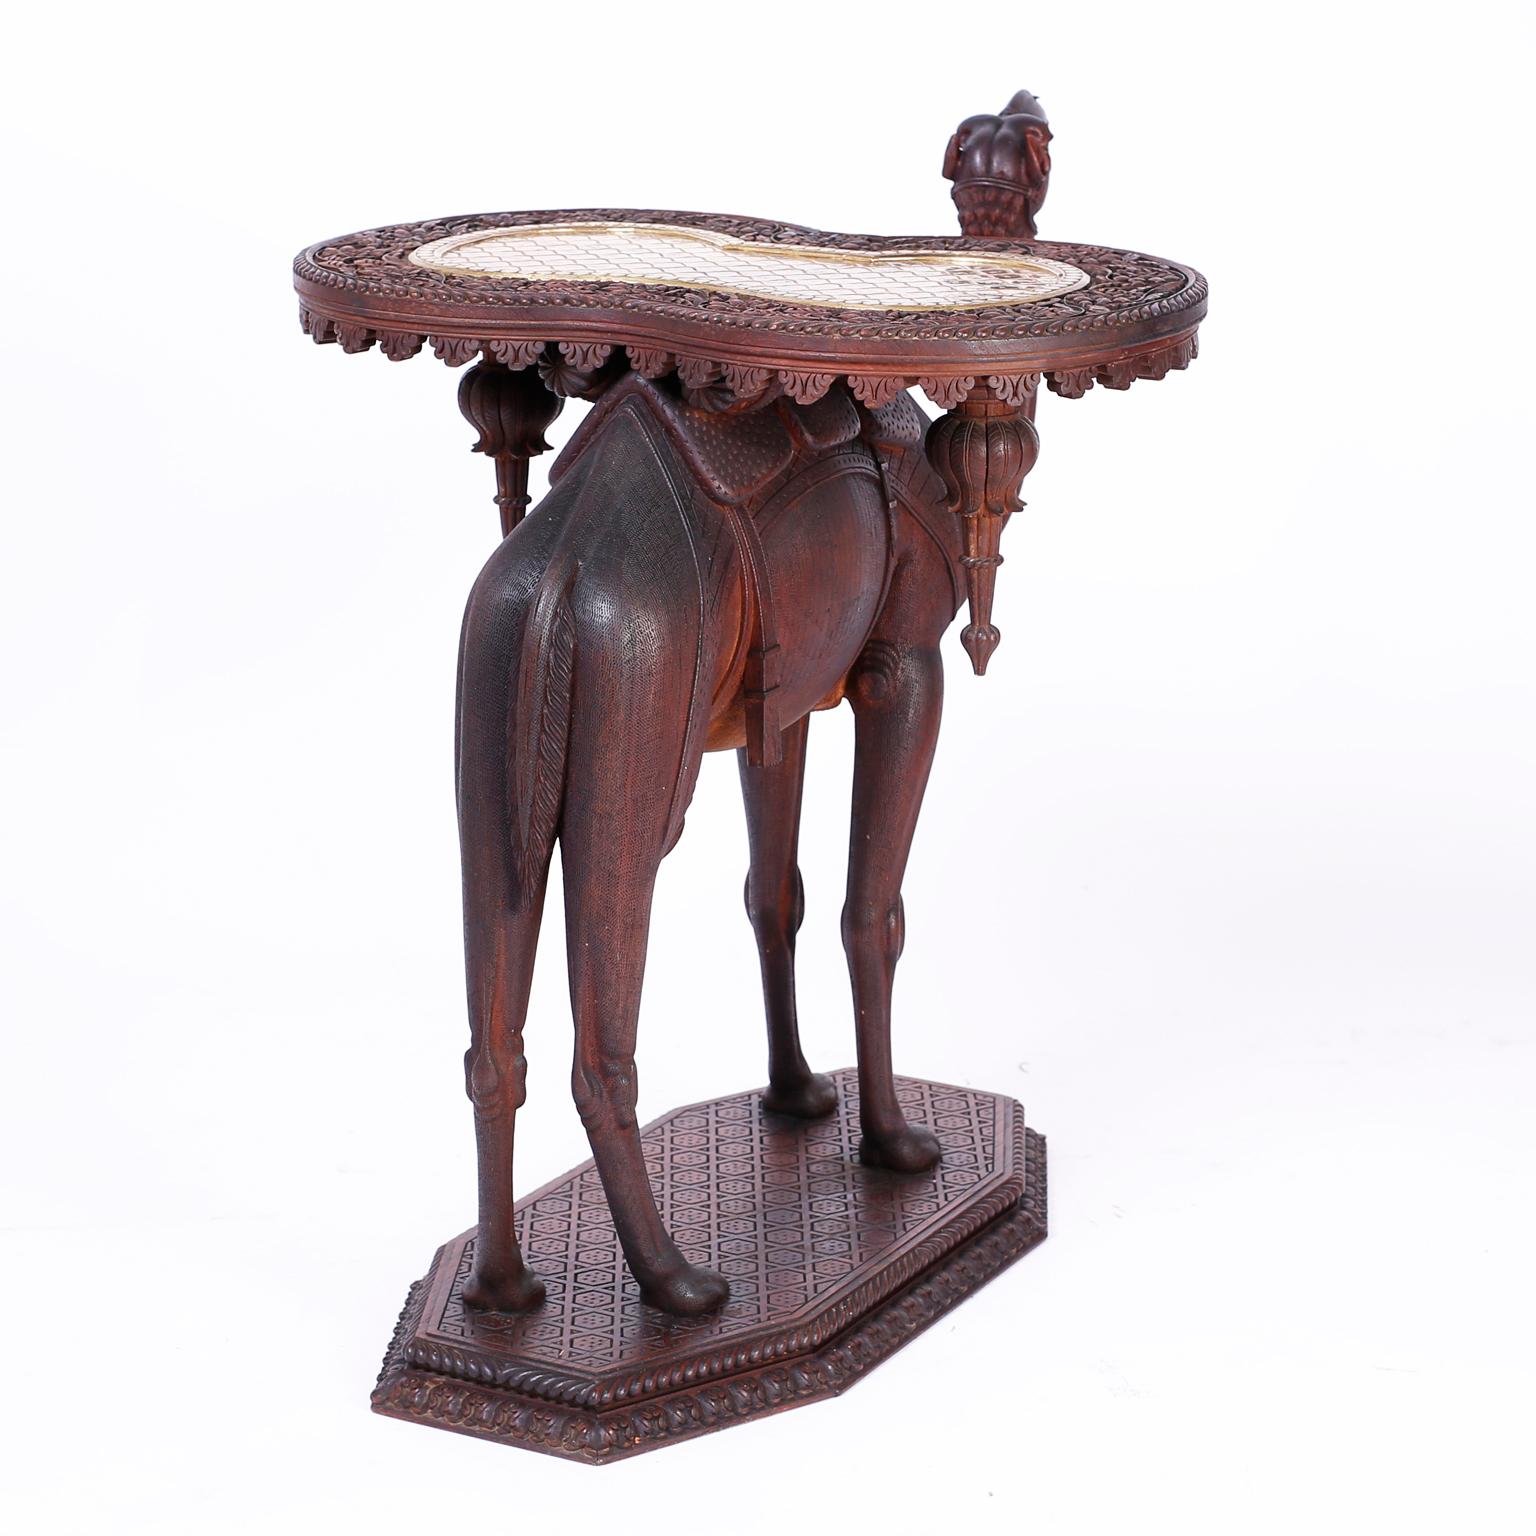 Hand-Carved Antique Anglo-Indian Camel Table or Stand